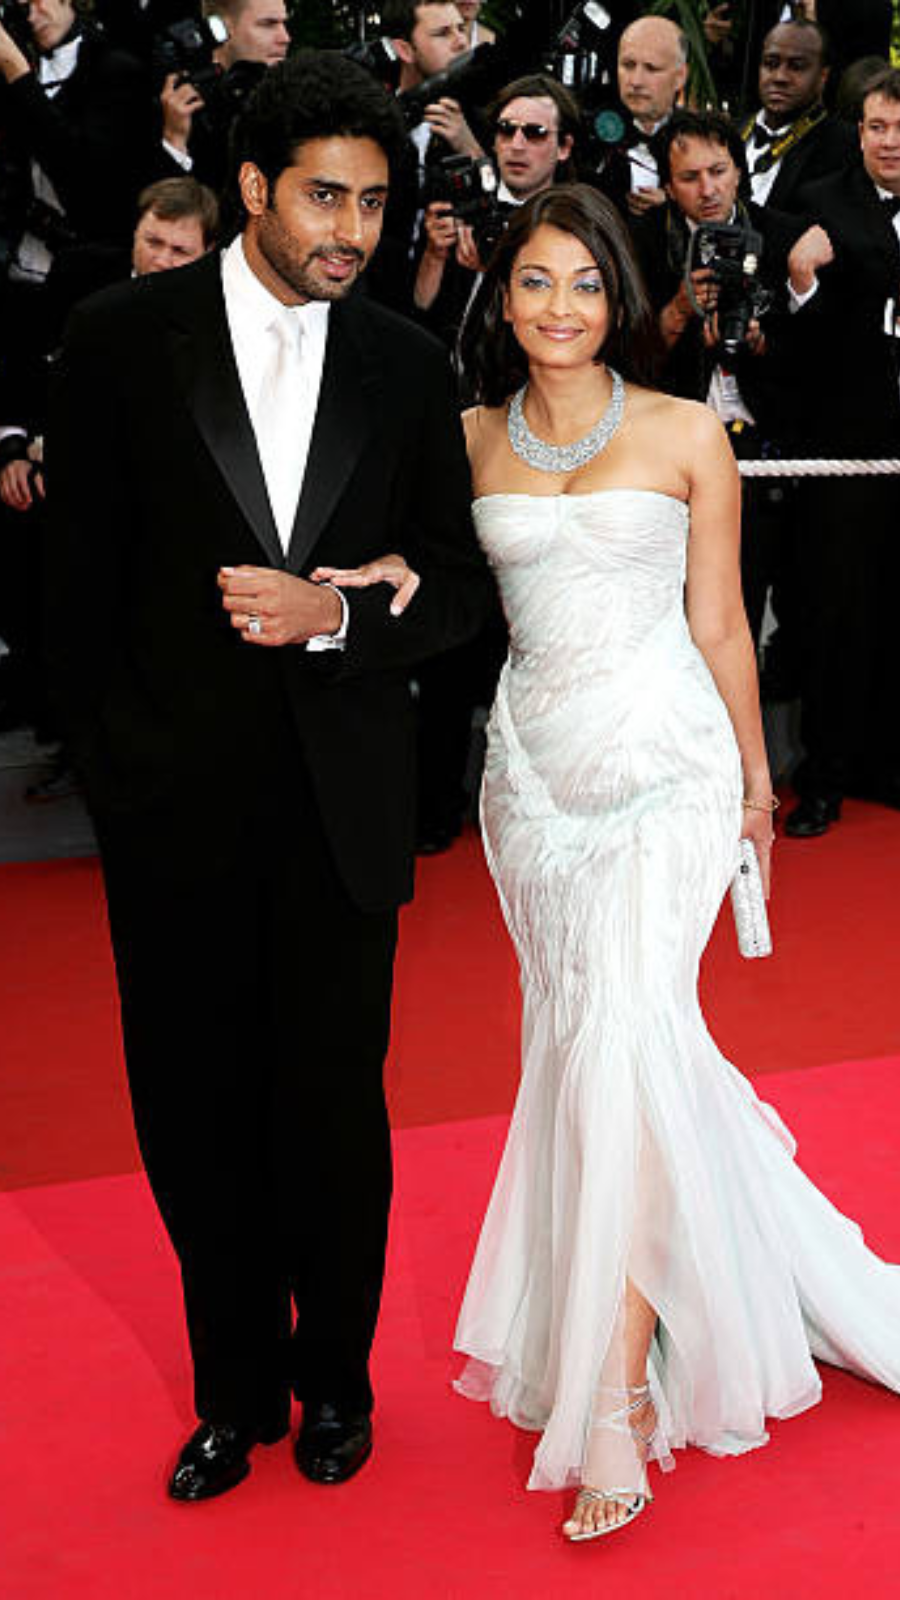 Aishwarya Rai Bachchan owned the red carpet at Cannes 2015 | BollySpice.com  – The latest movies, interviews in Bollywood